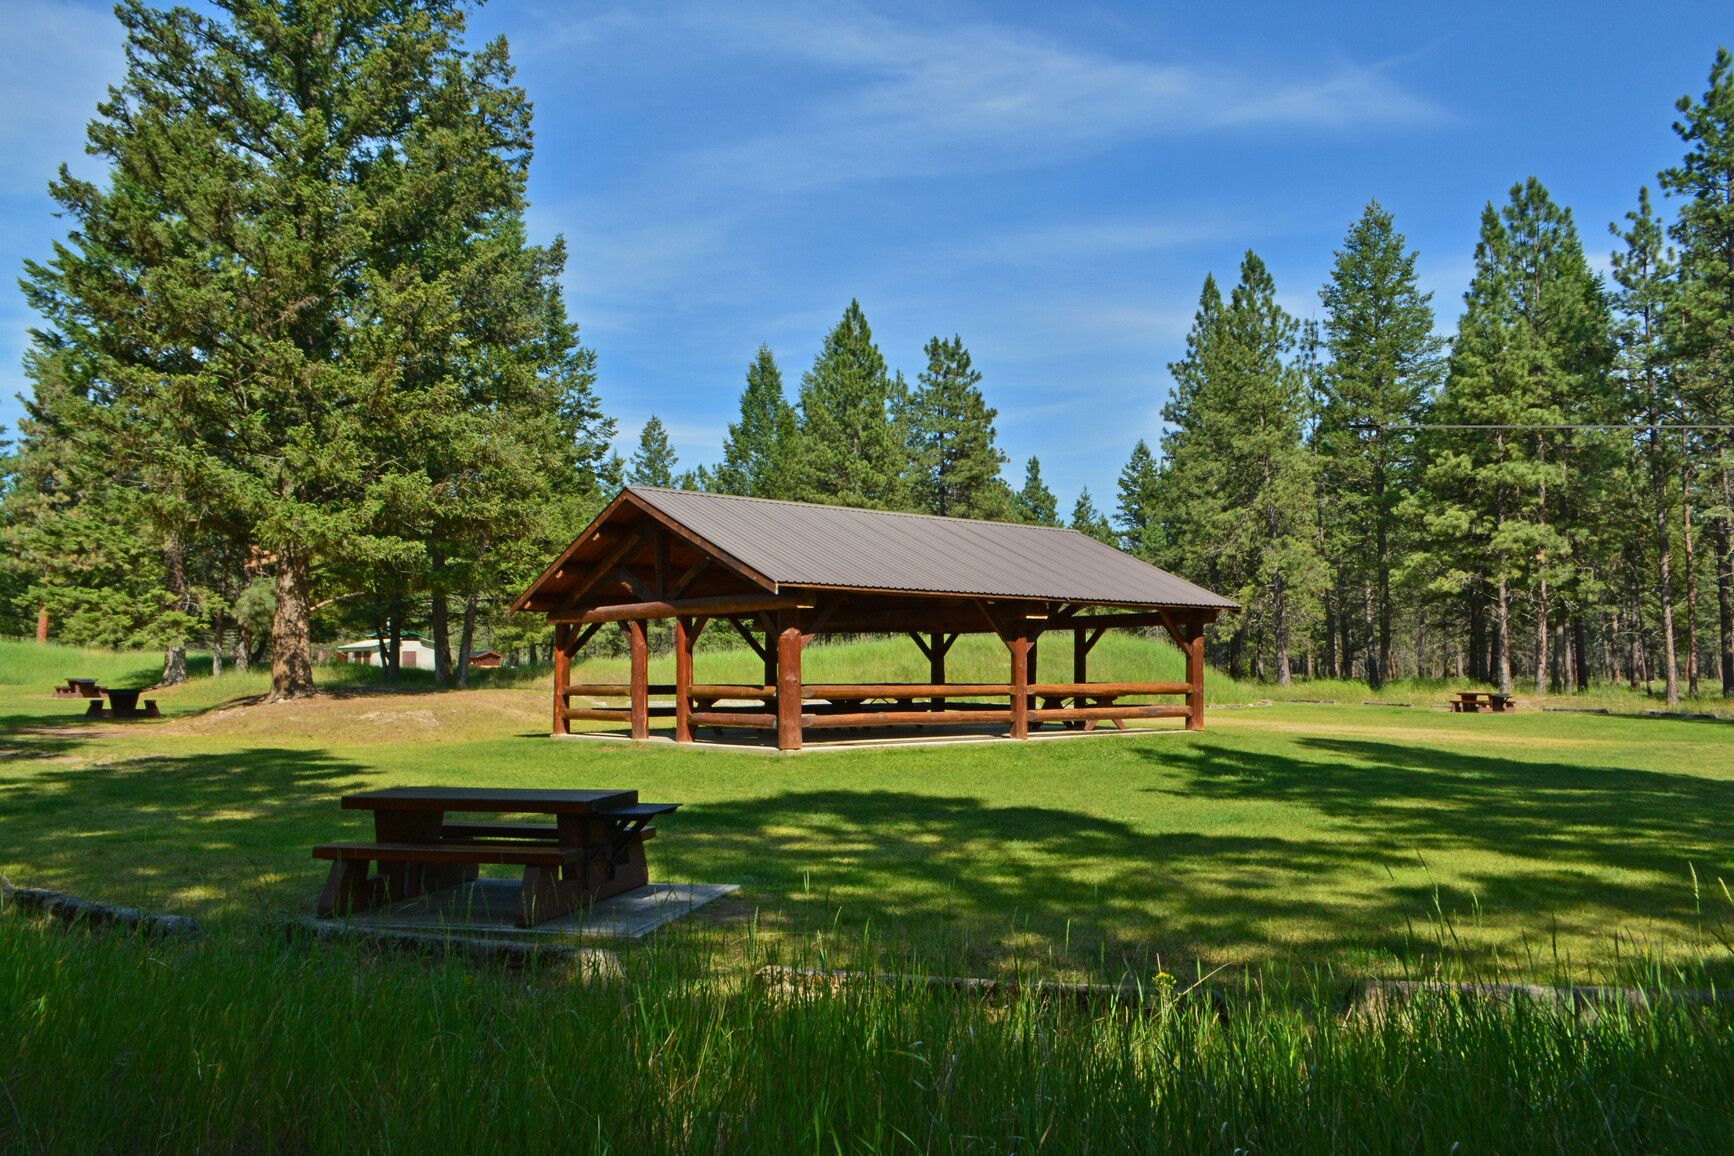 Enjoy picnics under the shade at Kikomun Creek Park's grassy area, complete with picnic shelter and tables.